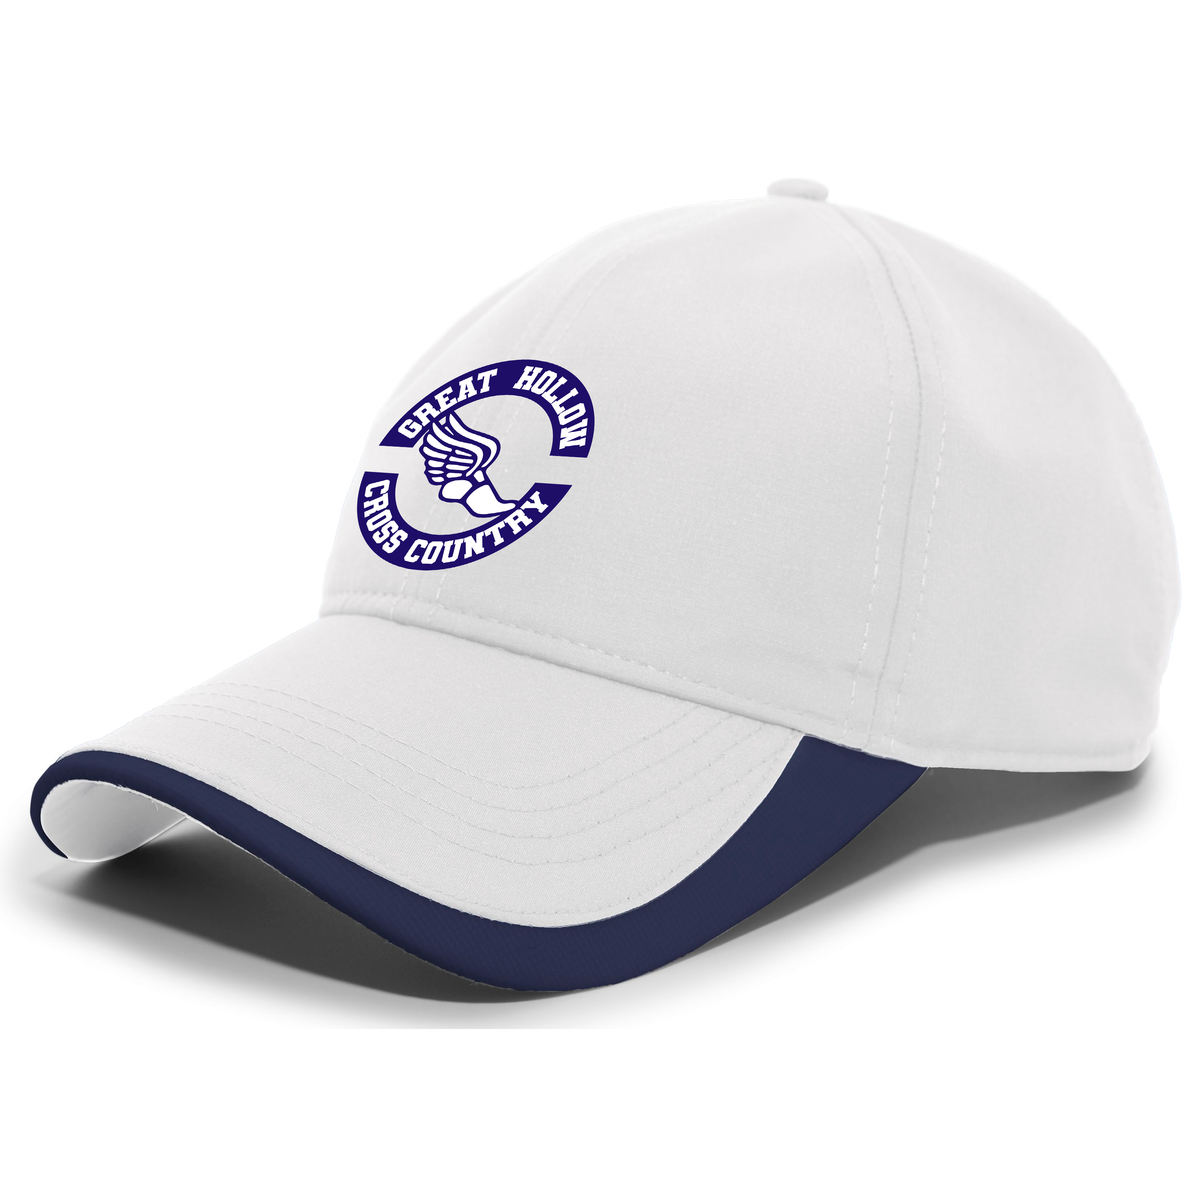 Great Hollow Cross Country Lite Series Cap With Trim